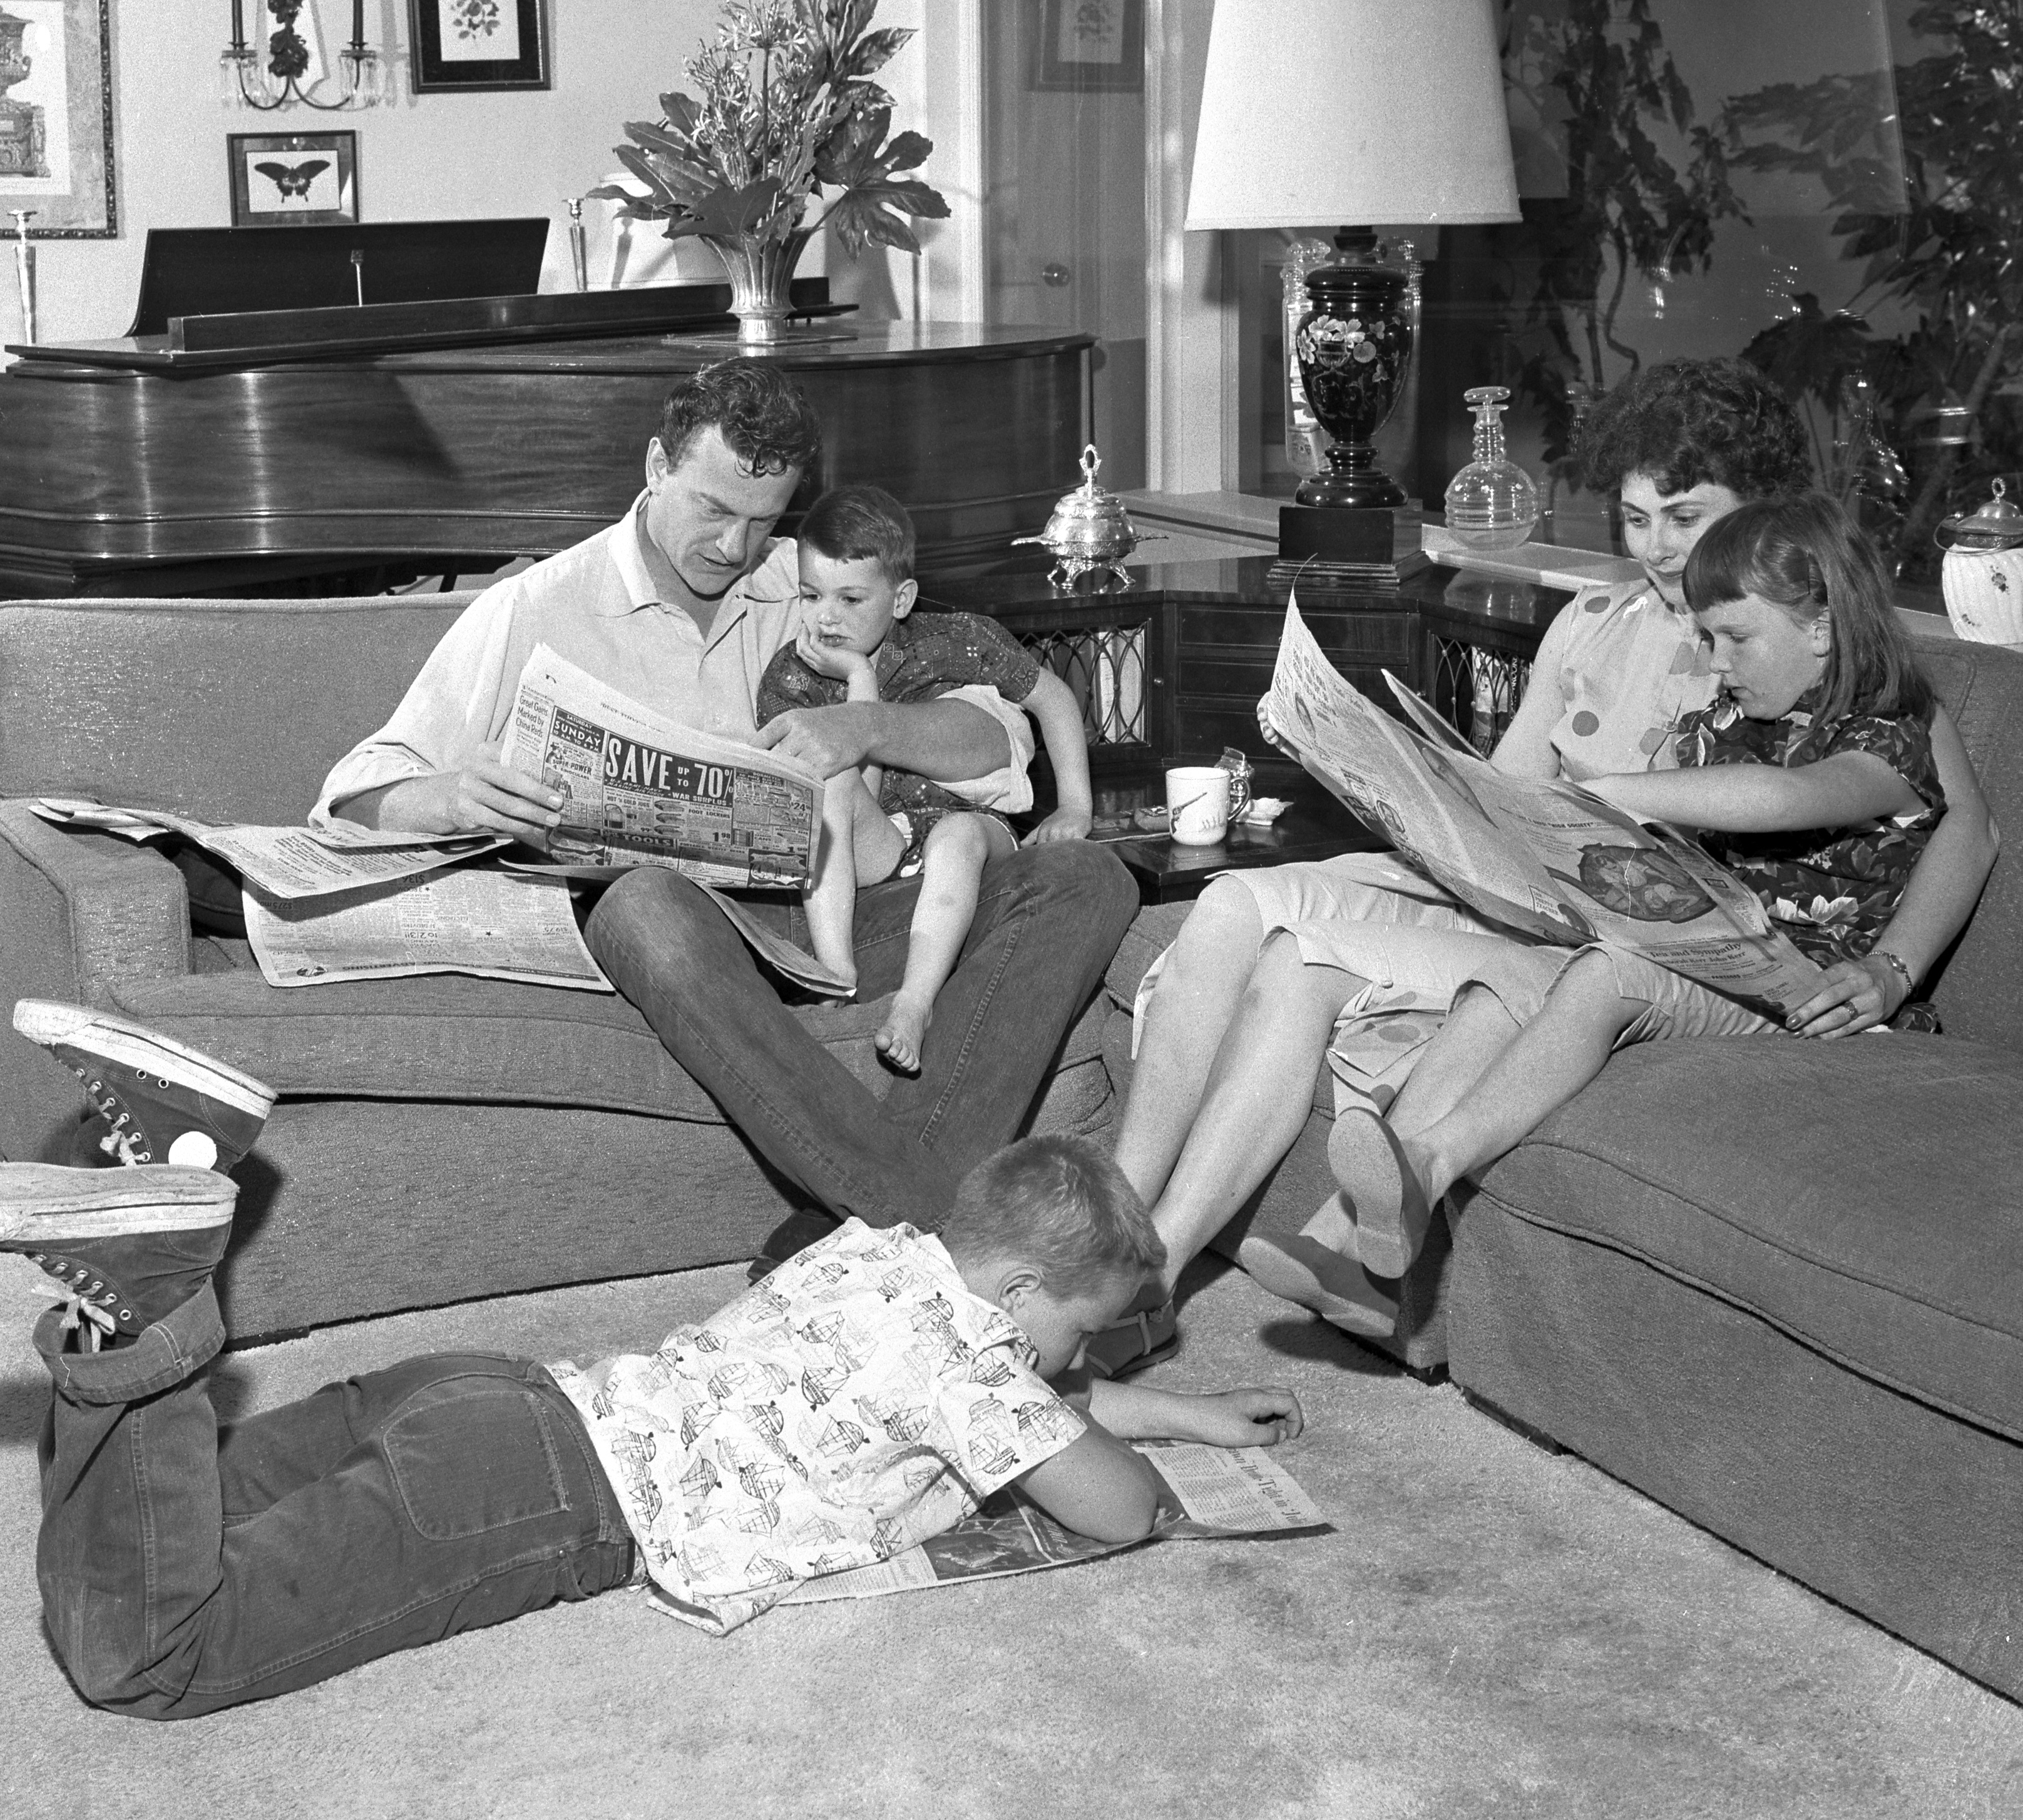 James Arness with Rolf (age 5), Virginia with daughter Jenny Lee (age 8) and Craig (age 10) on the floor are pictured at home on May 4, 1957. | Source: Getty Images